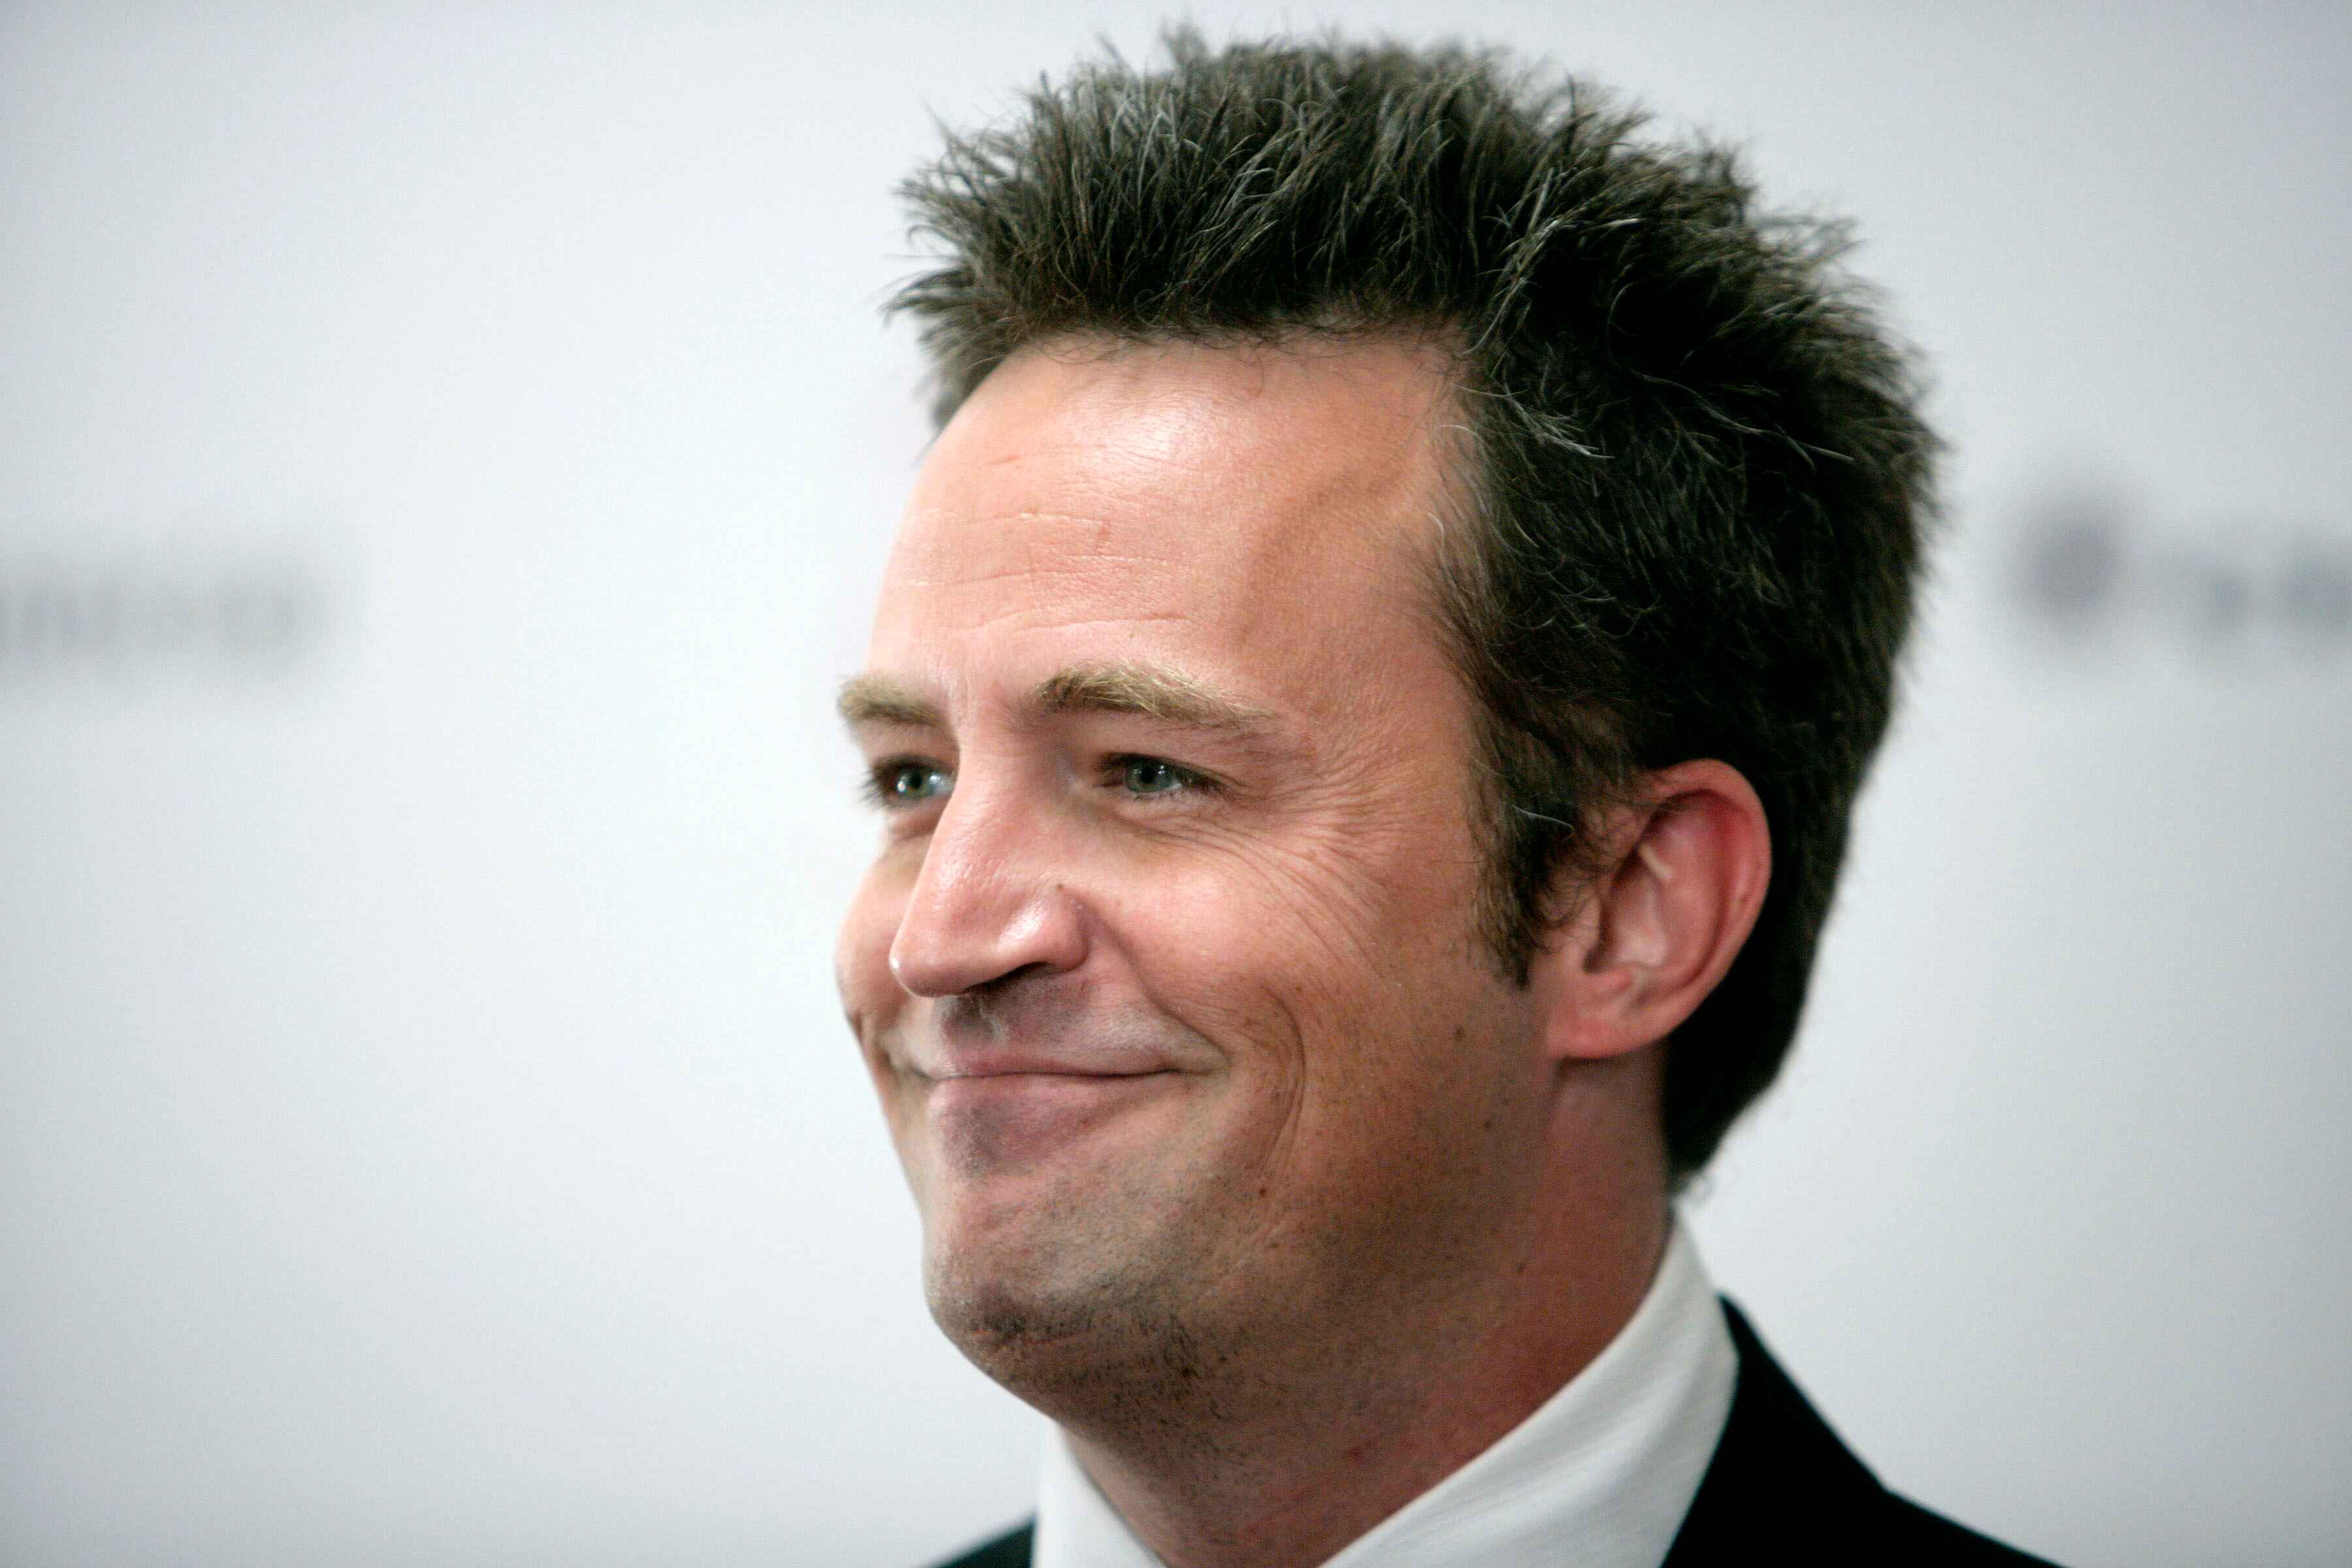 Matthew Perry’s Cause Of Death Still Pending Autopsy Results